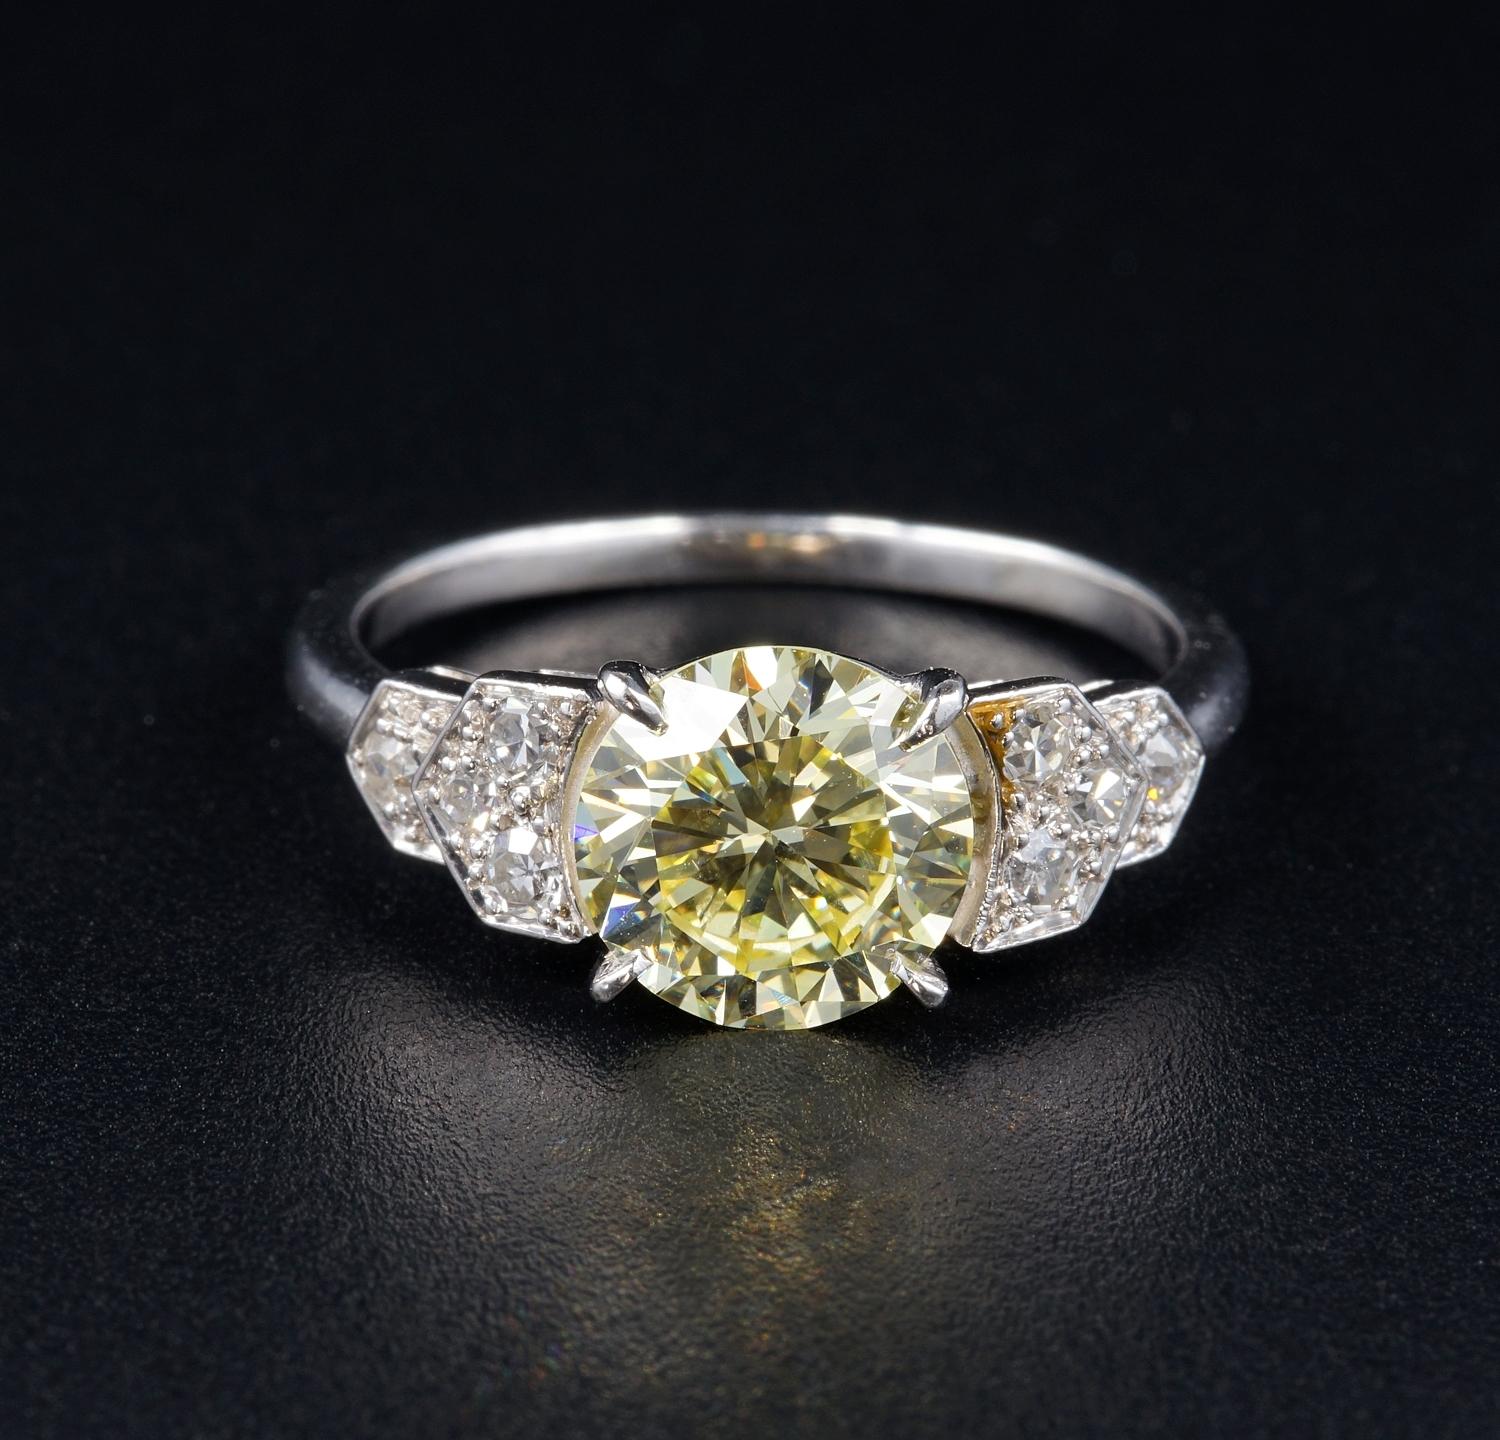 Late Art Deco one off French Diamond ring
This outstanding pool of light has been mounted on a for ever tasteful designed Platinum mounting with gorgeous Diamond motifs on sides
Rare and beautiful, stunning Brilliant cut Fancy Yellow Diamond of